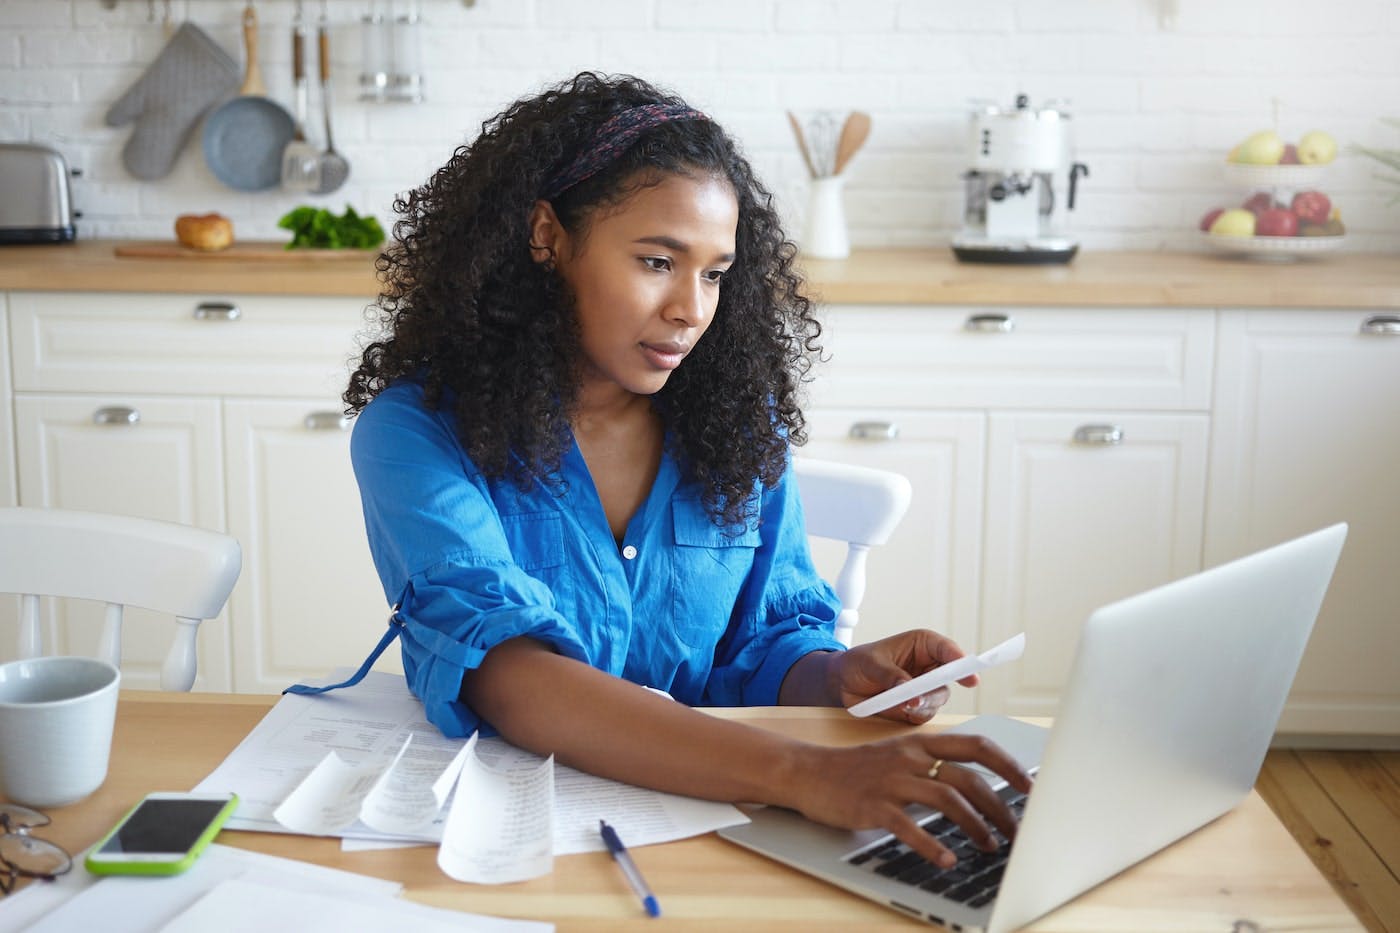 Woman sitting in a kitchen looking at a laptop.